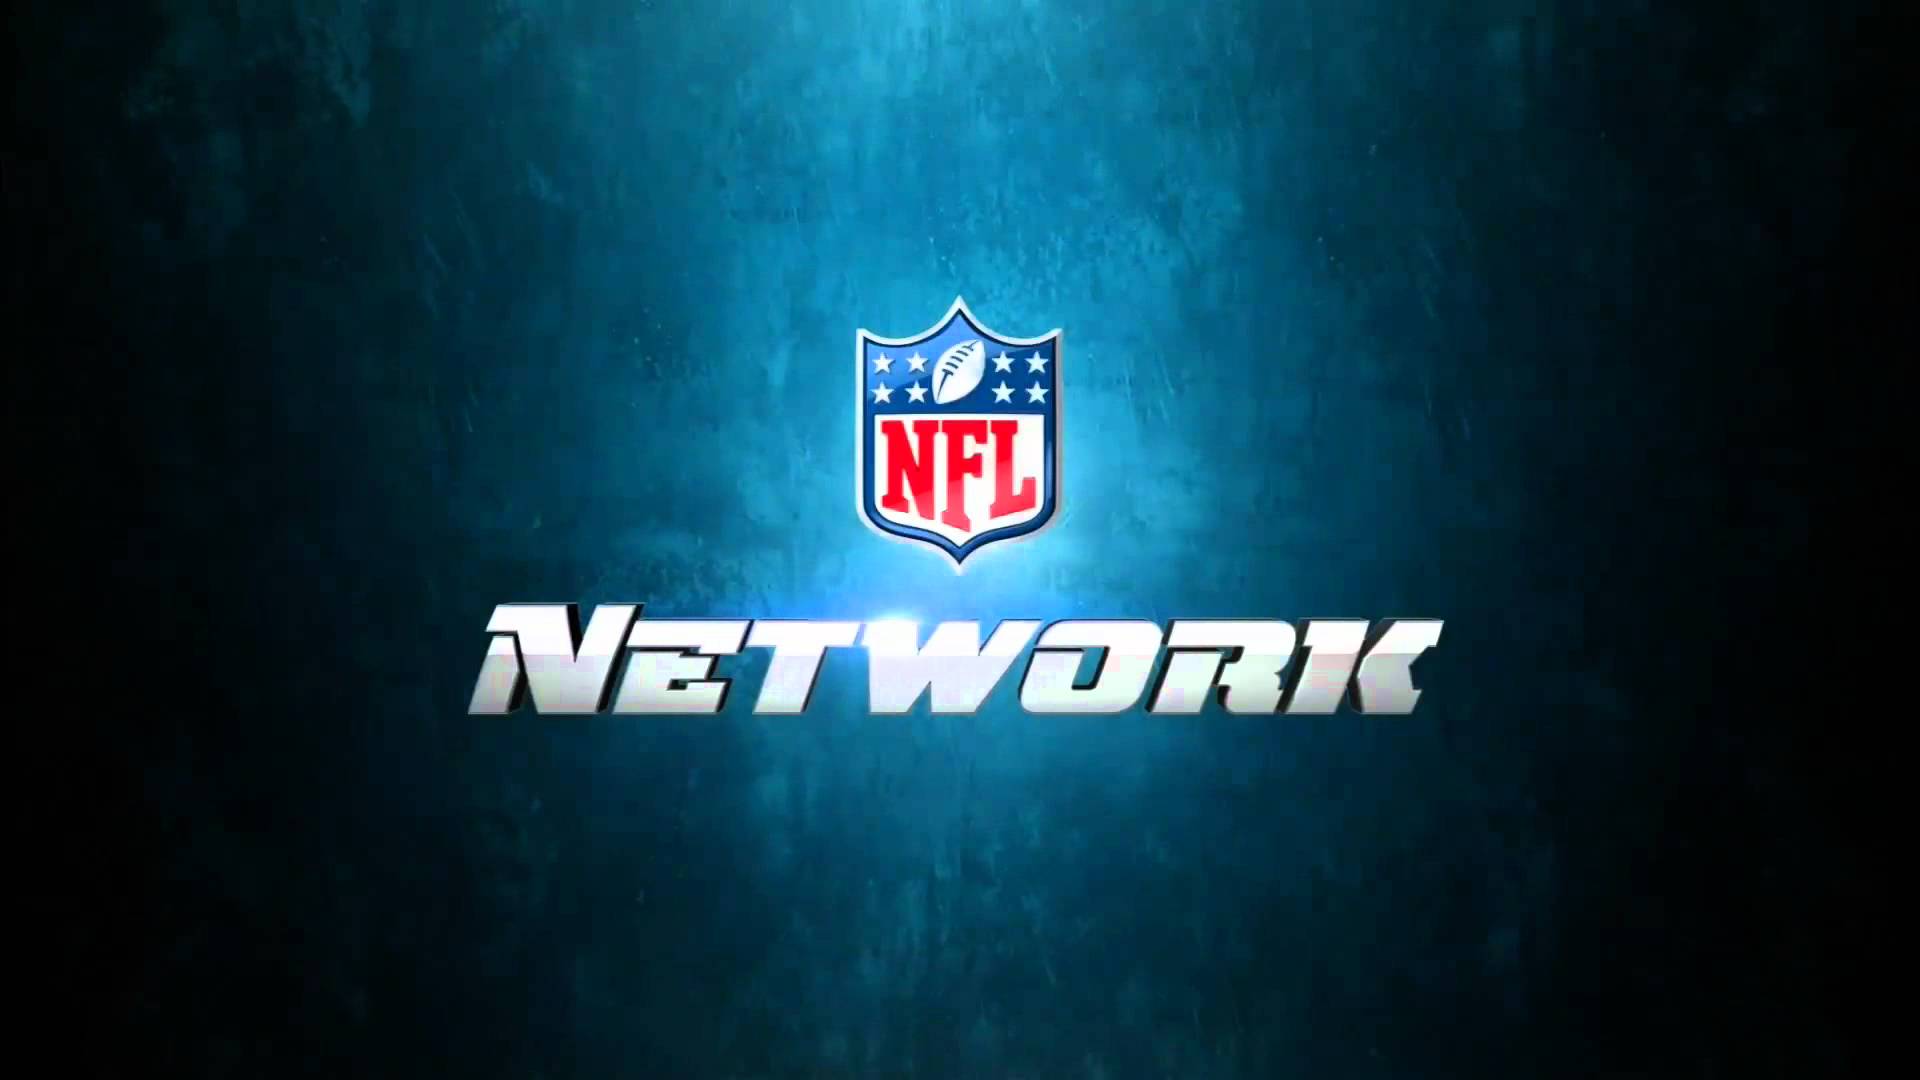 The NFL Network's Interactive Large Touch Screen Display